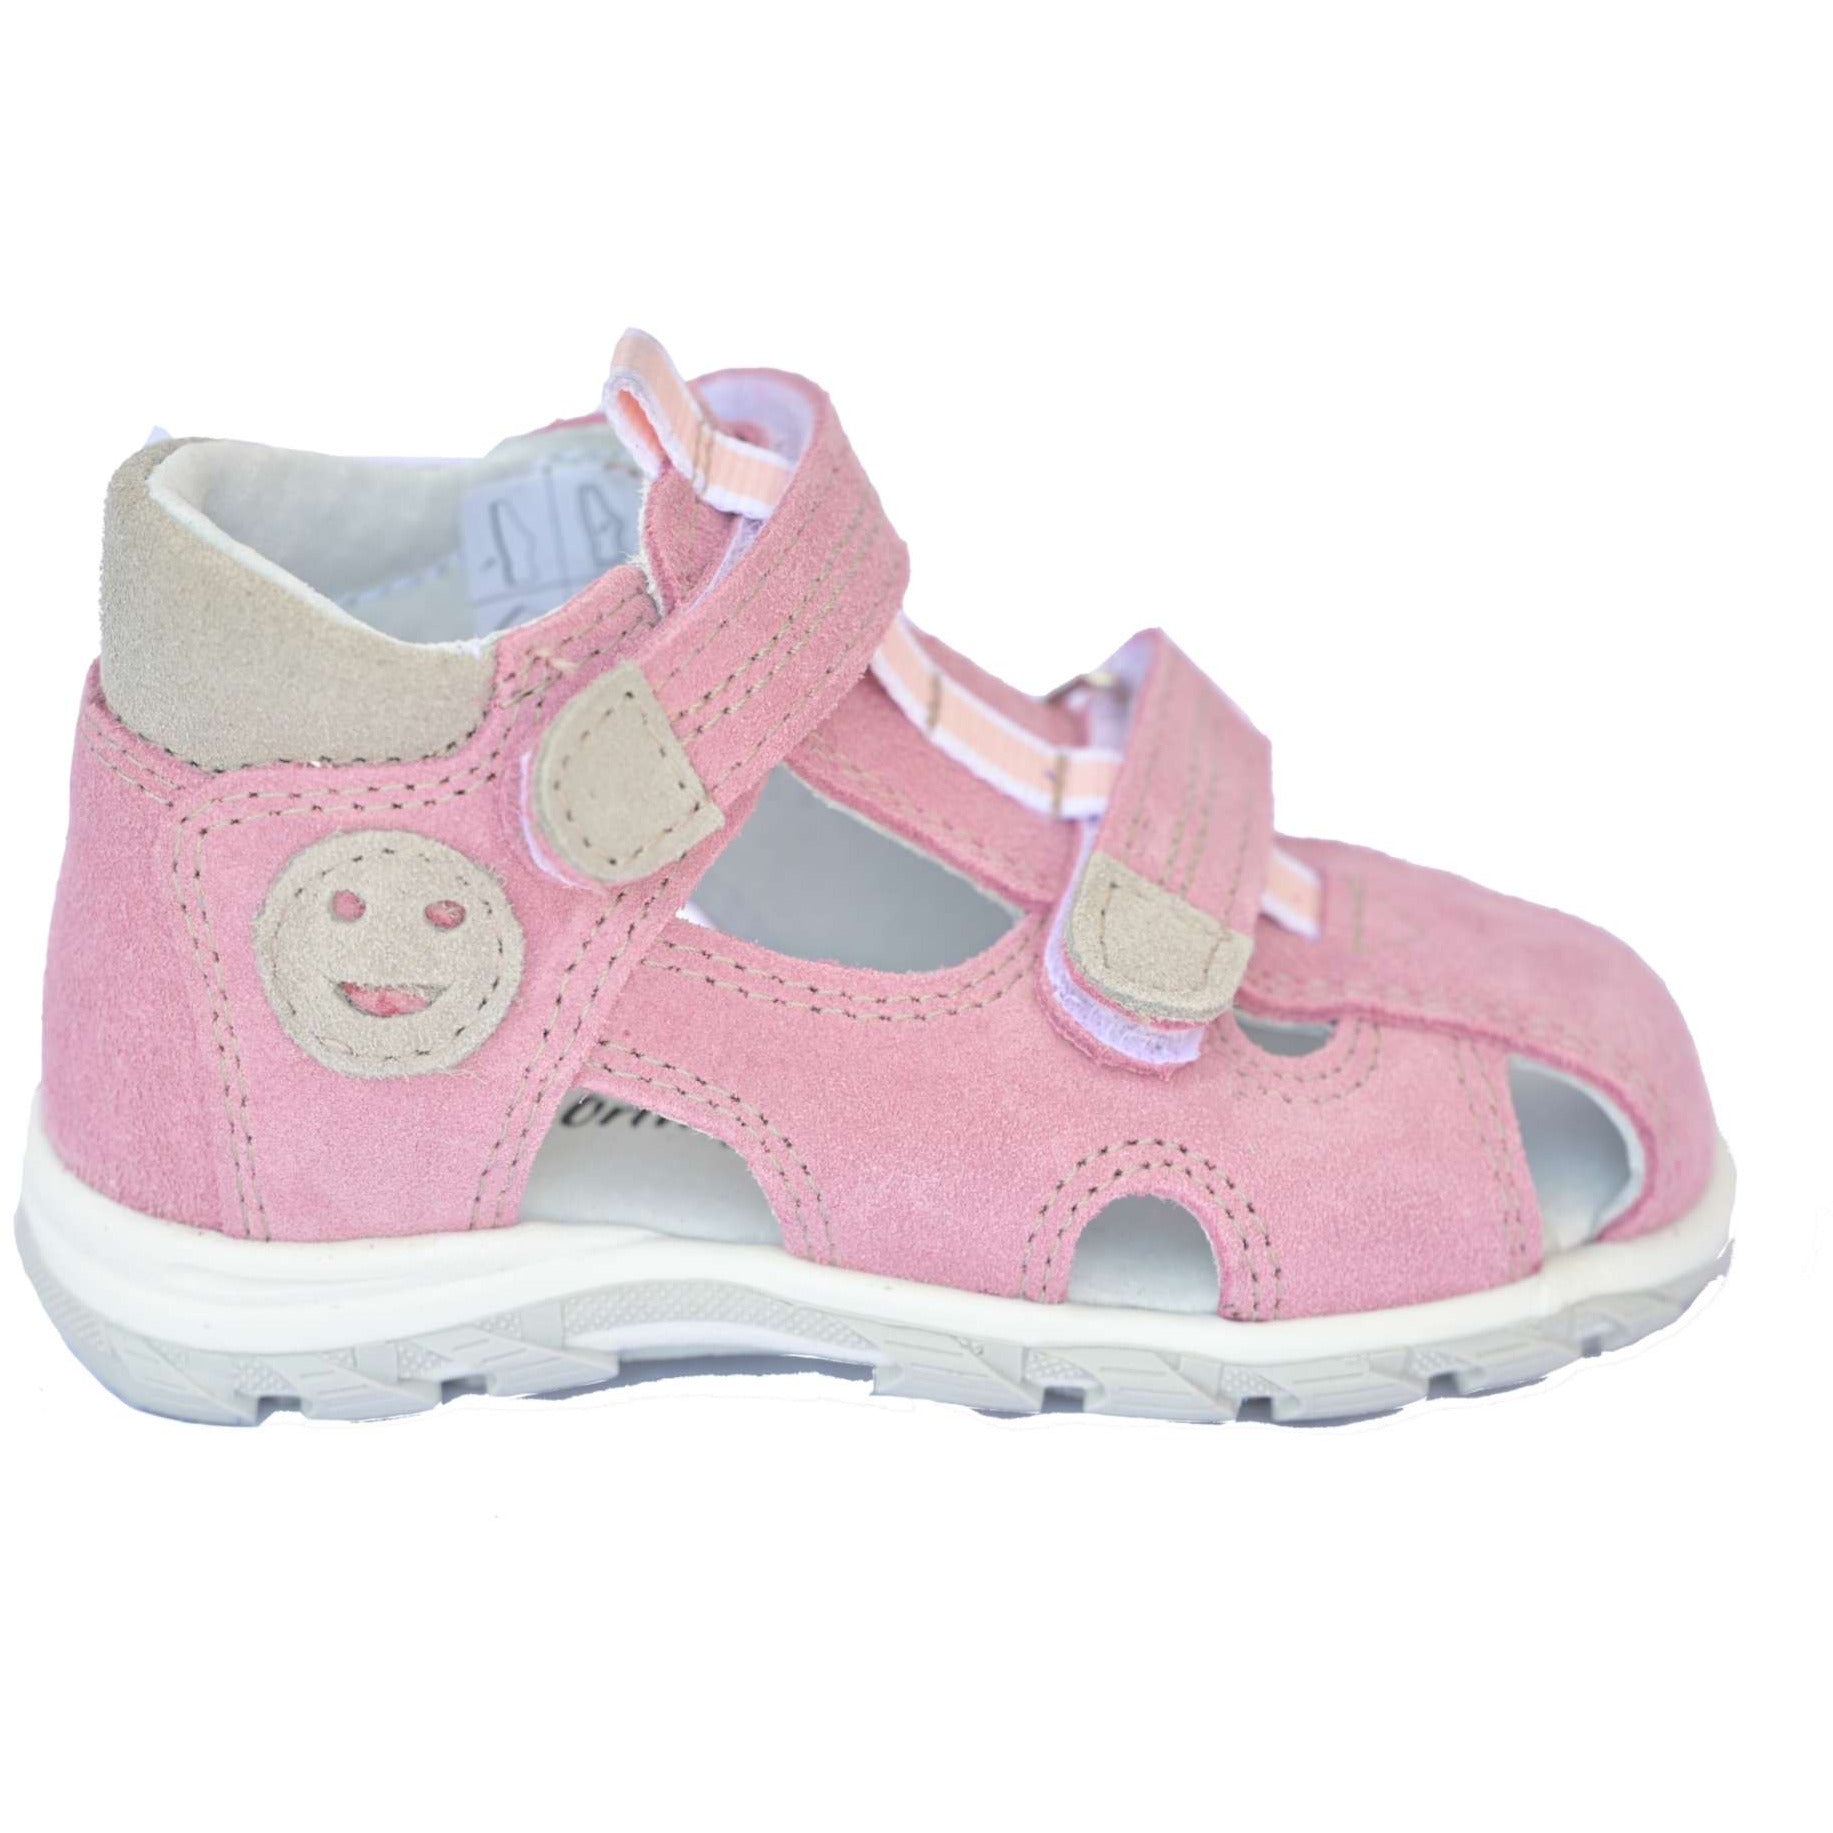 Soft pink certified toddler orthopedic sandals, with semi closed toe box, are a great model if your daughter needs orthopedic and high arch support shoes.